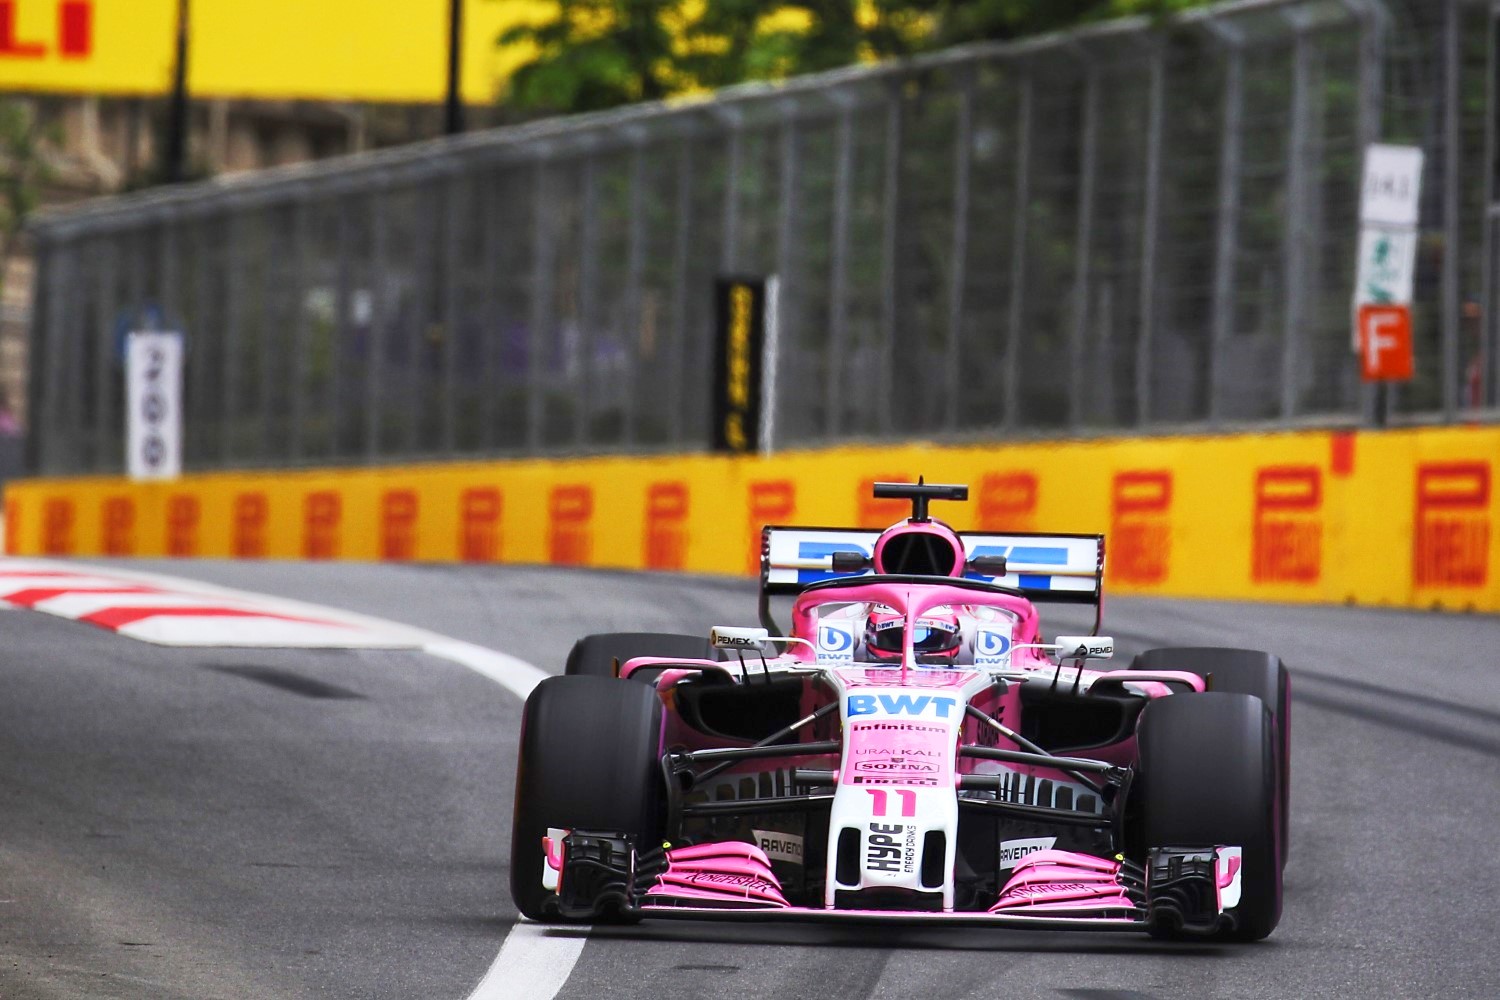 Wolff has no plan to buy the pink team